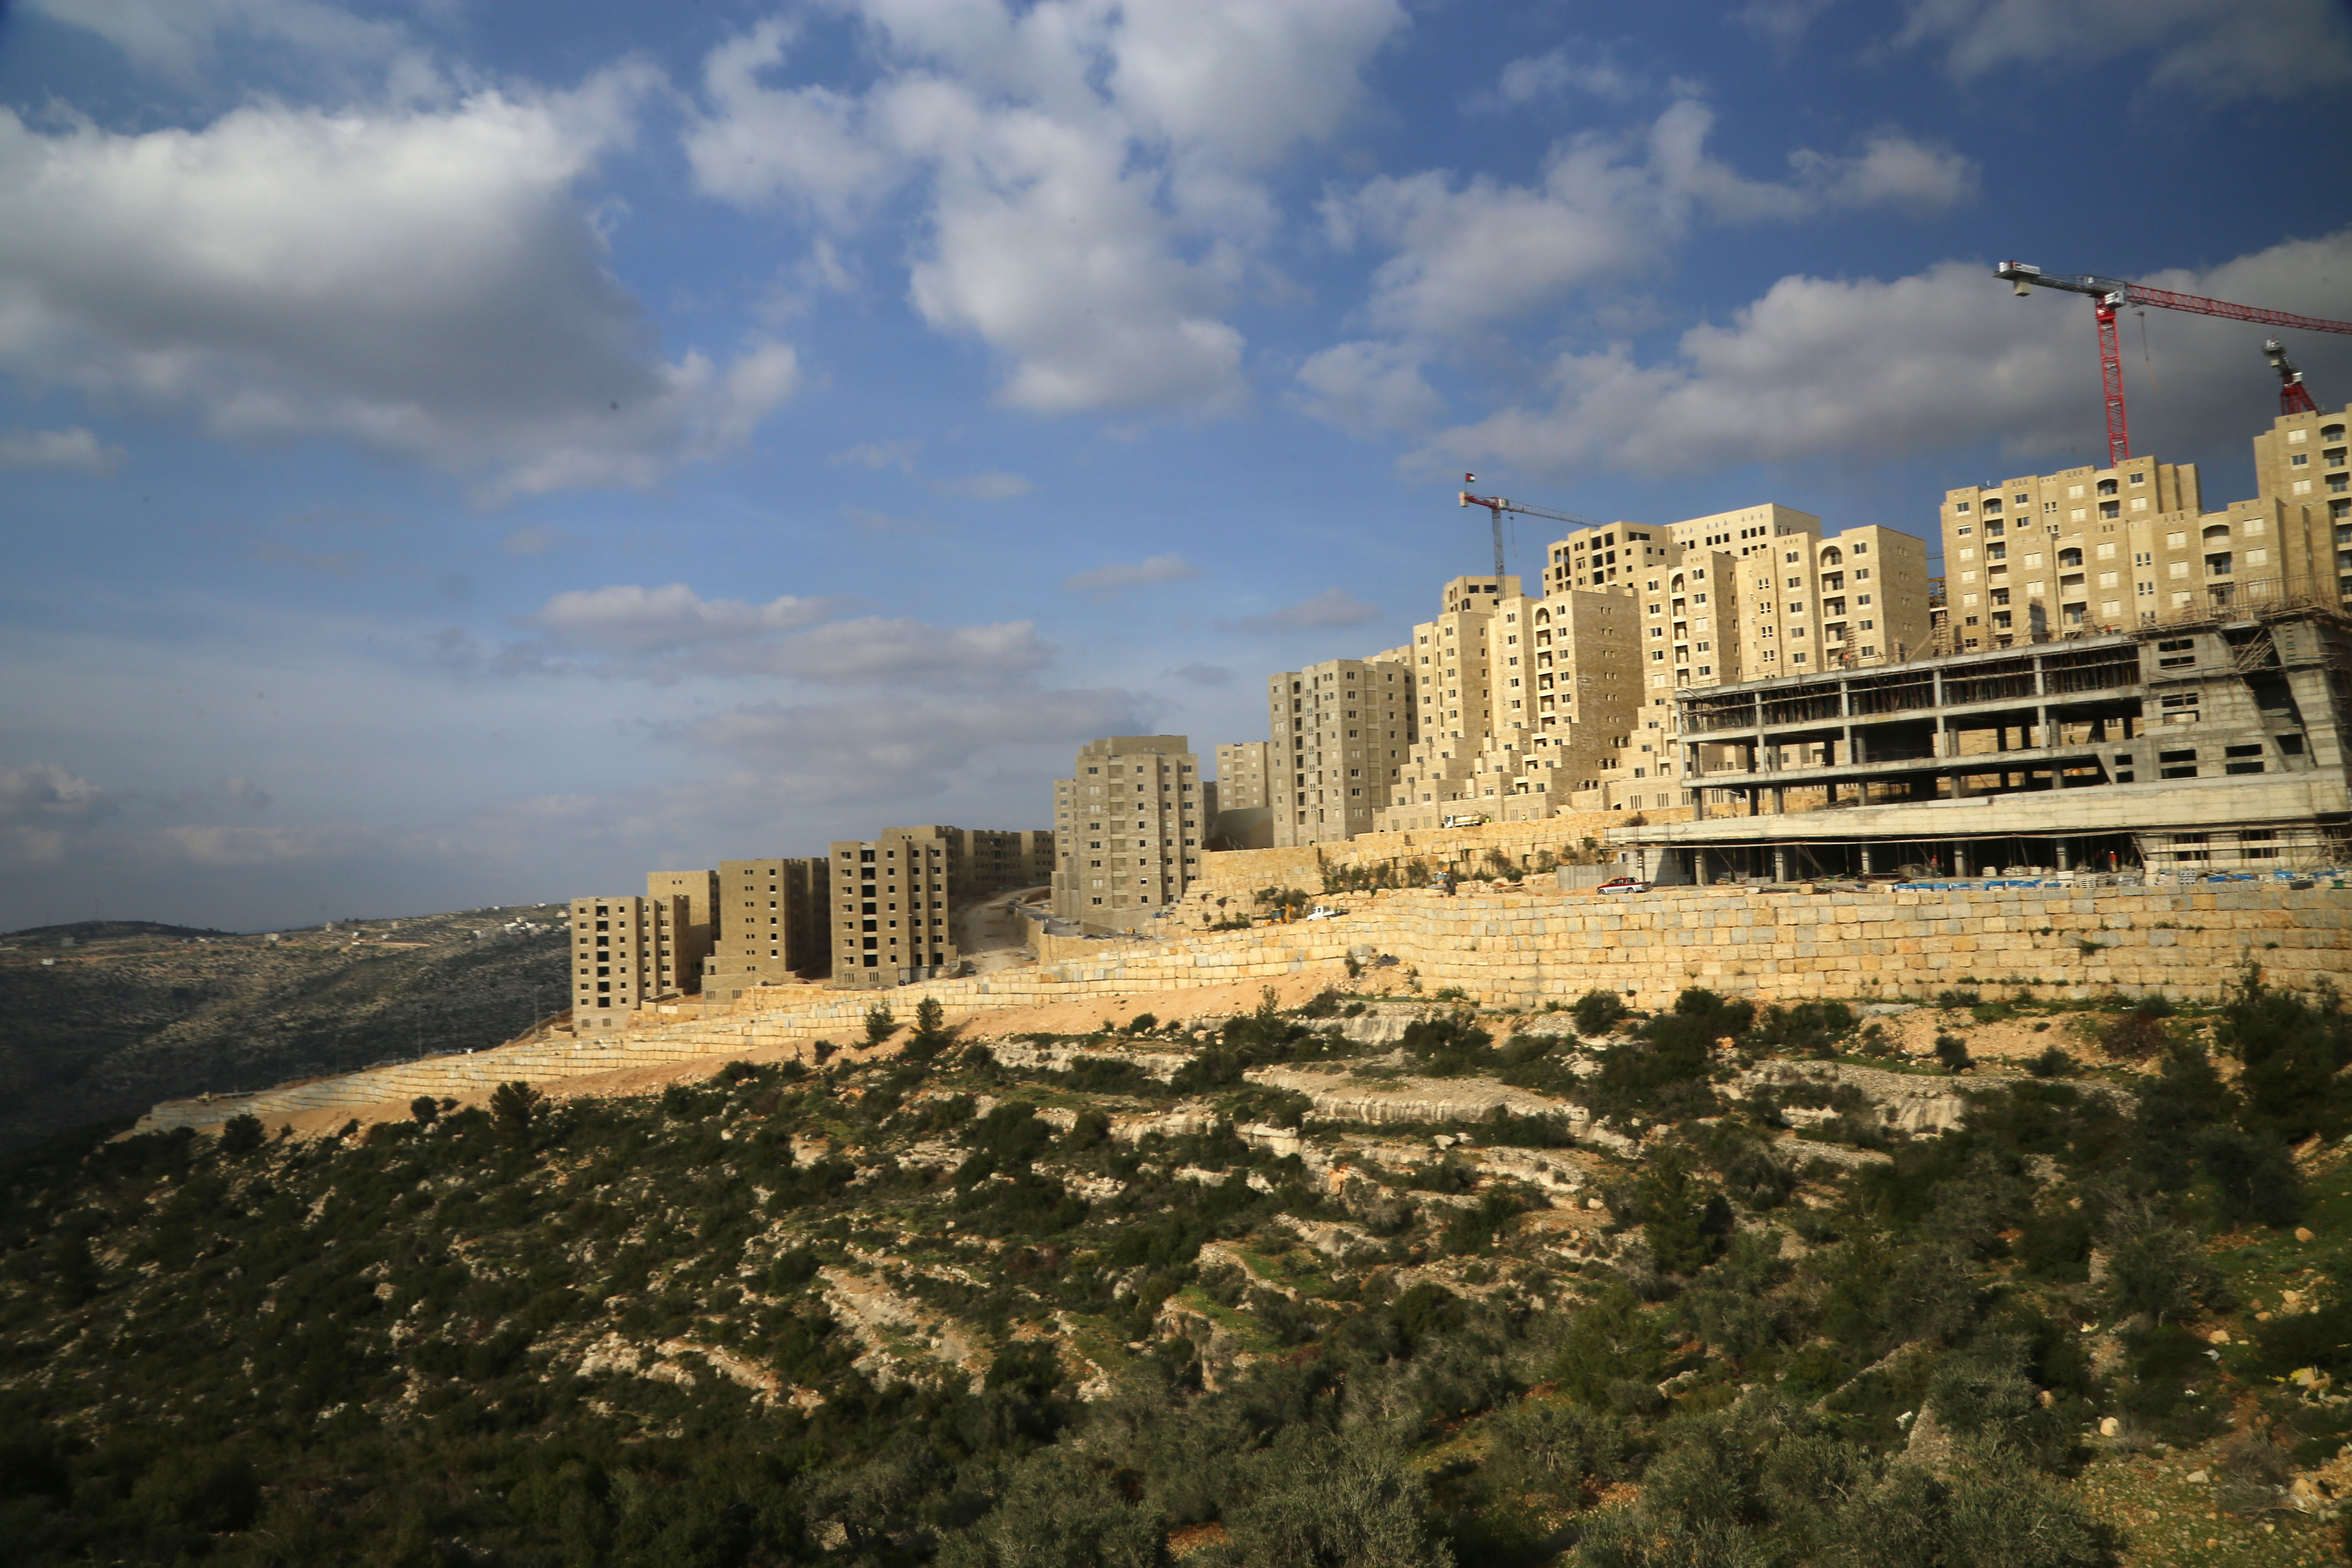 Rawabi aims to house between 25,000 and 40,000 inhabitants. Only two weeks ago, developer Bashar al-Masri announced he would finally be able to connect the billion-dollar investment to the Israeli water grid, marking the final step before the city’s first residents can move in within a few months.